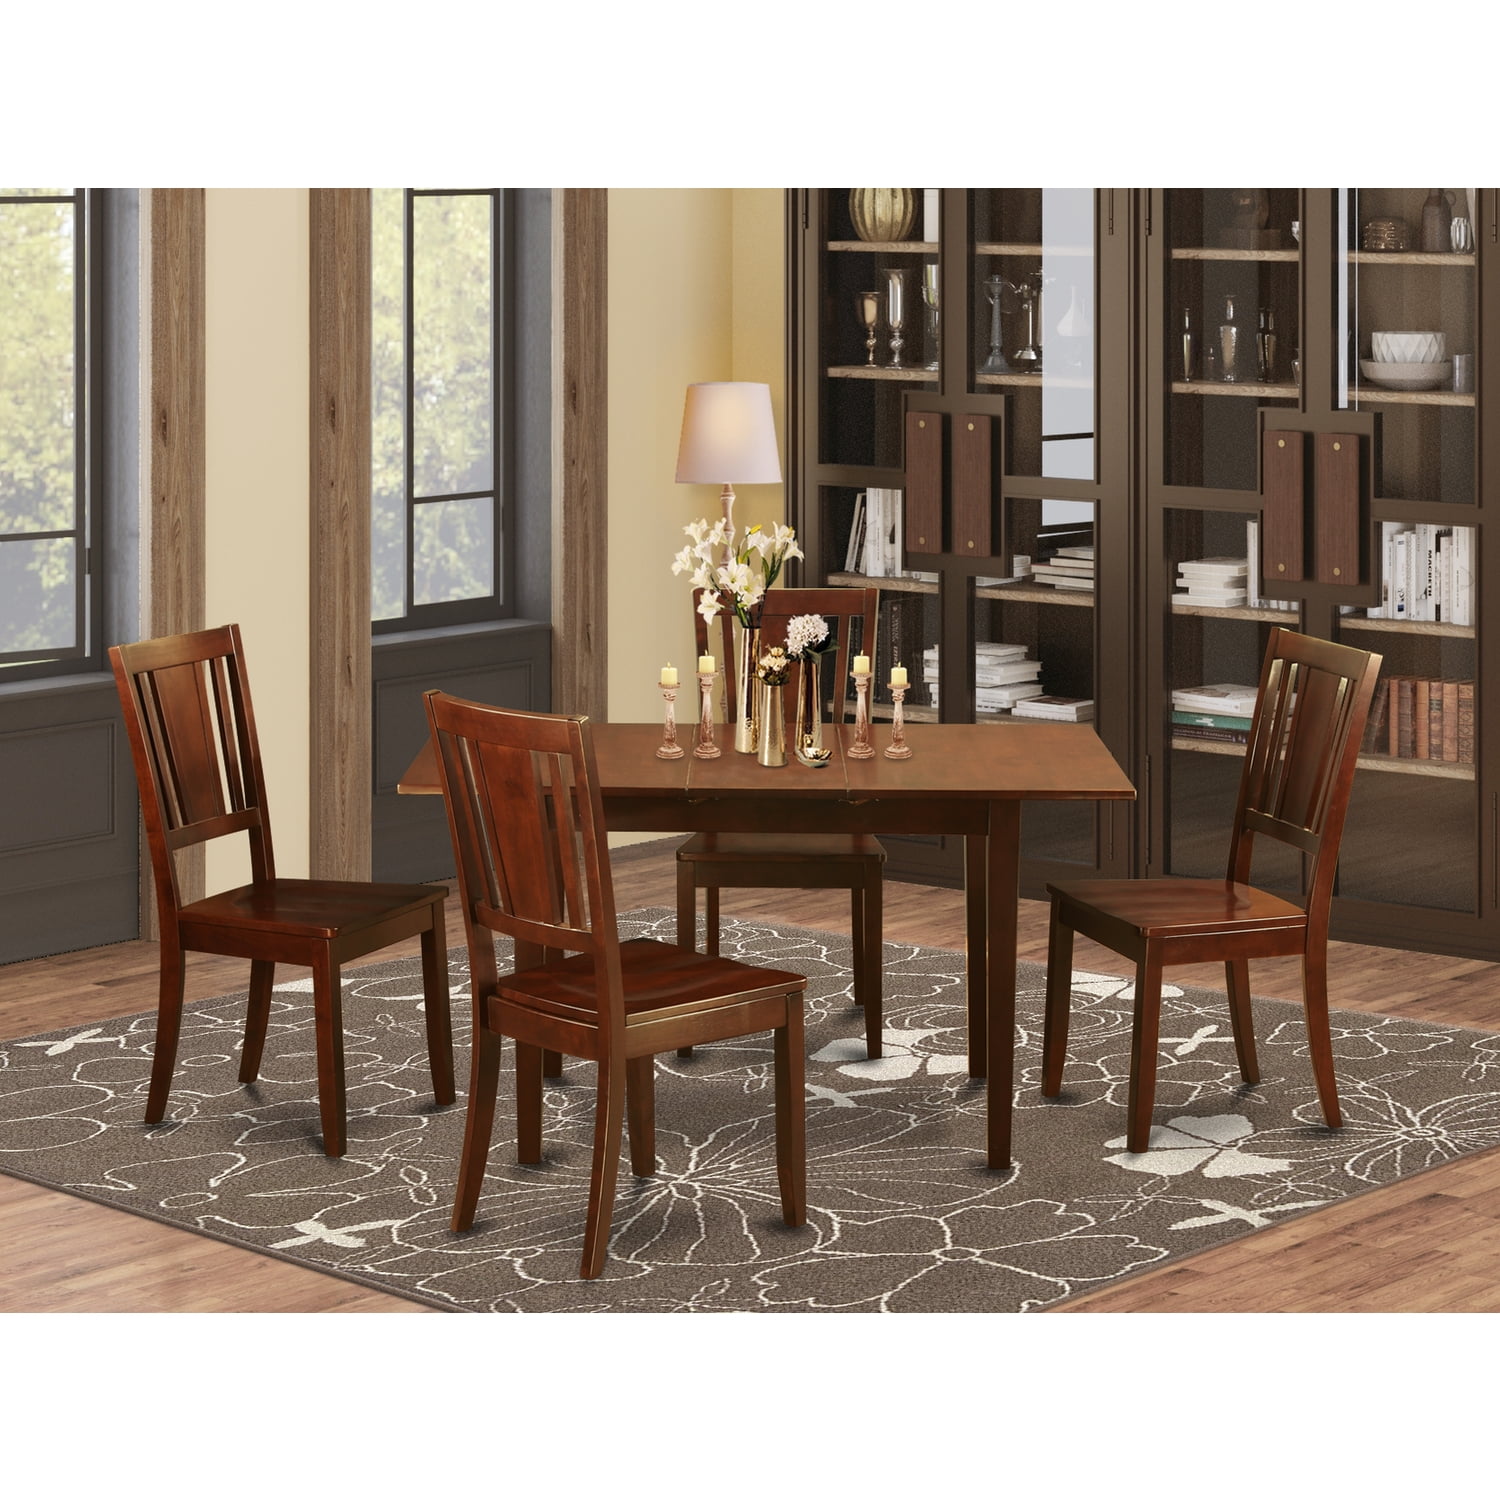 Small Dinette Set - Table With Leaf And Kitchen Chairs-Finish:Mahogany